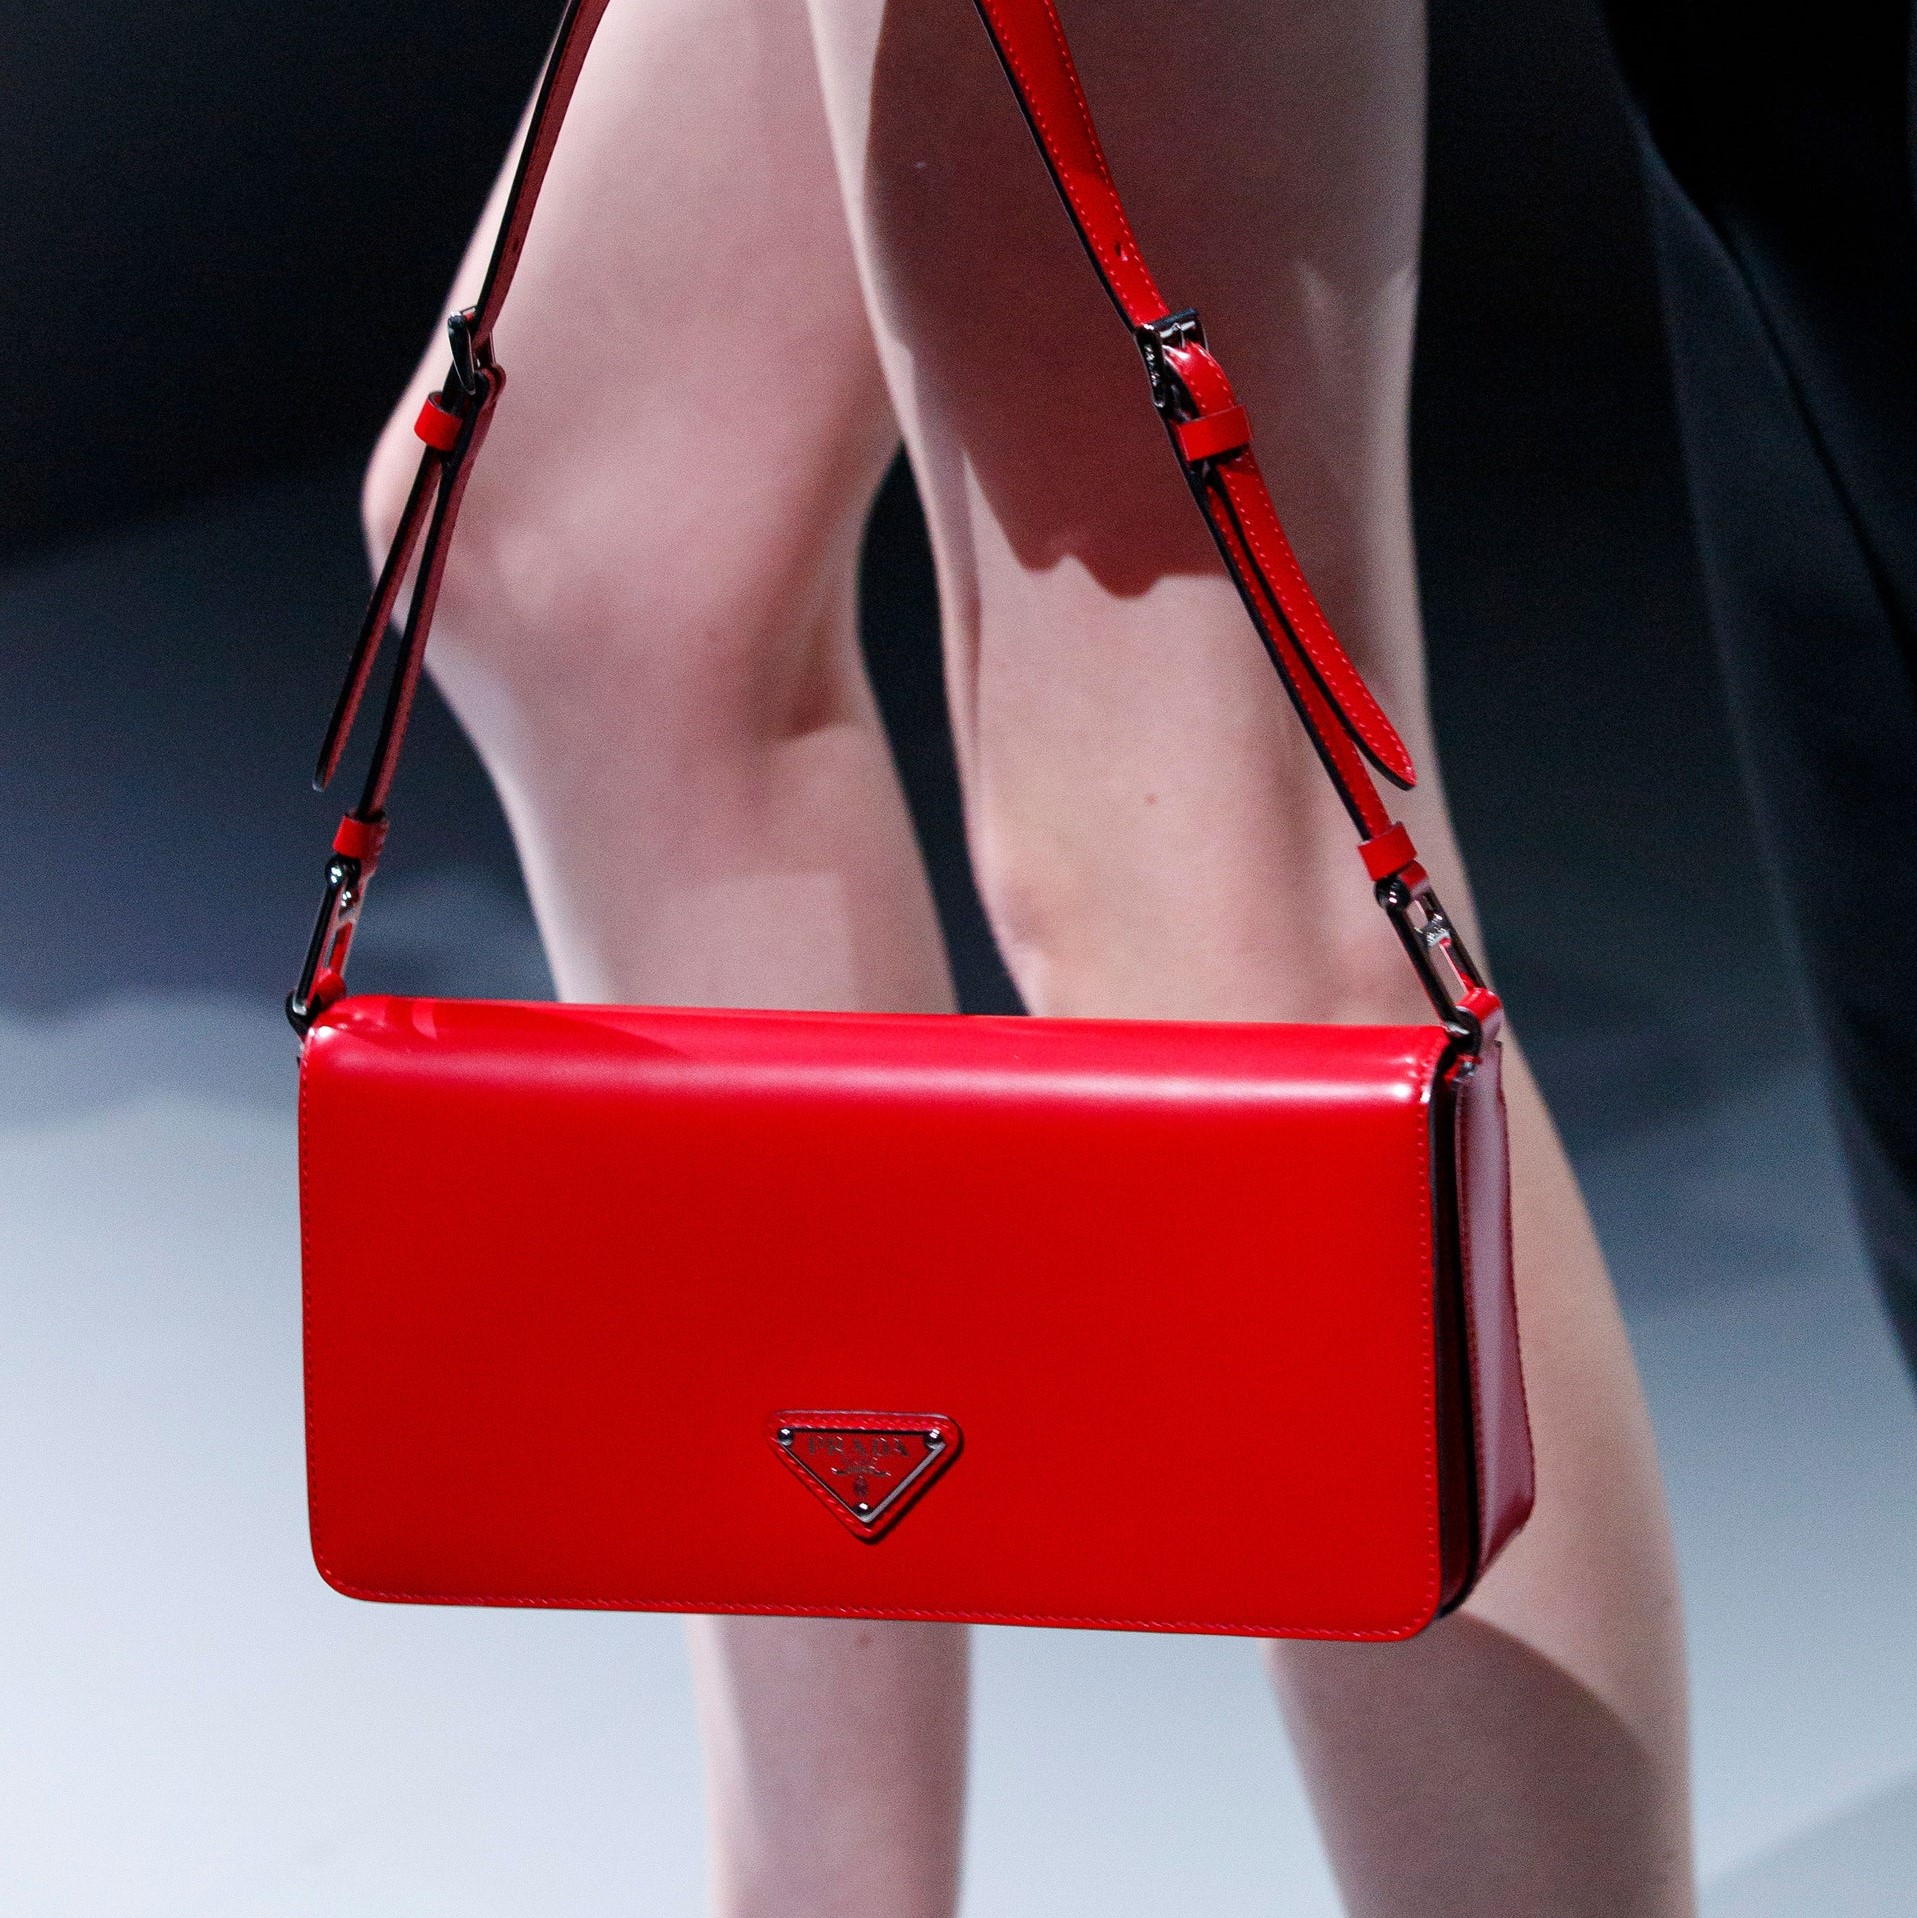 Prada Re-Releases The Celebrity-Approved Bag Of The Summer – CR